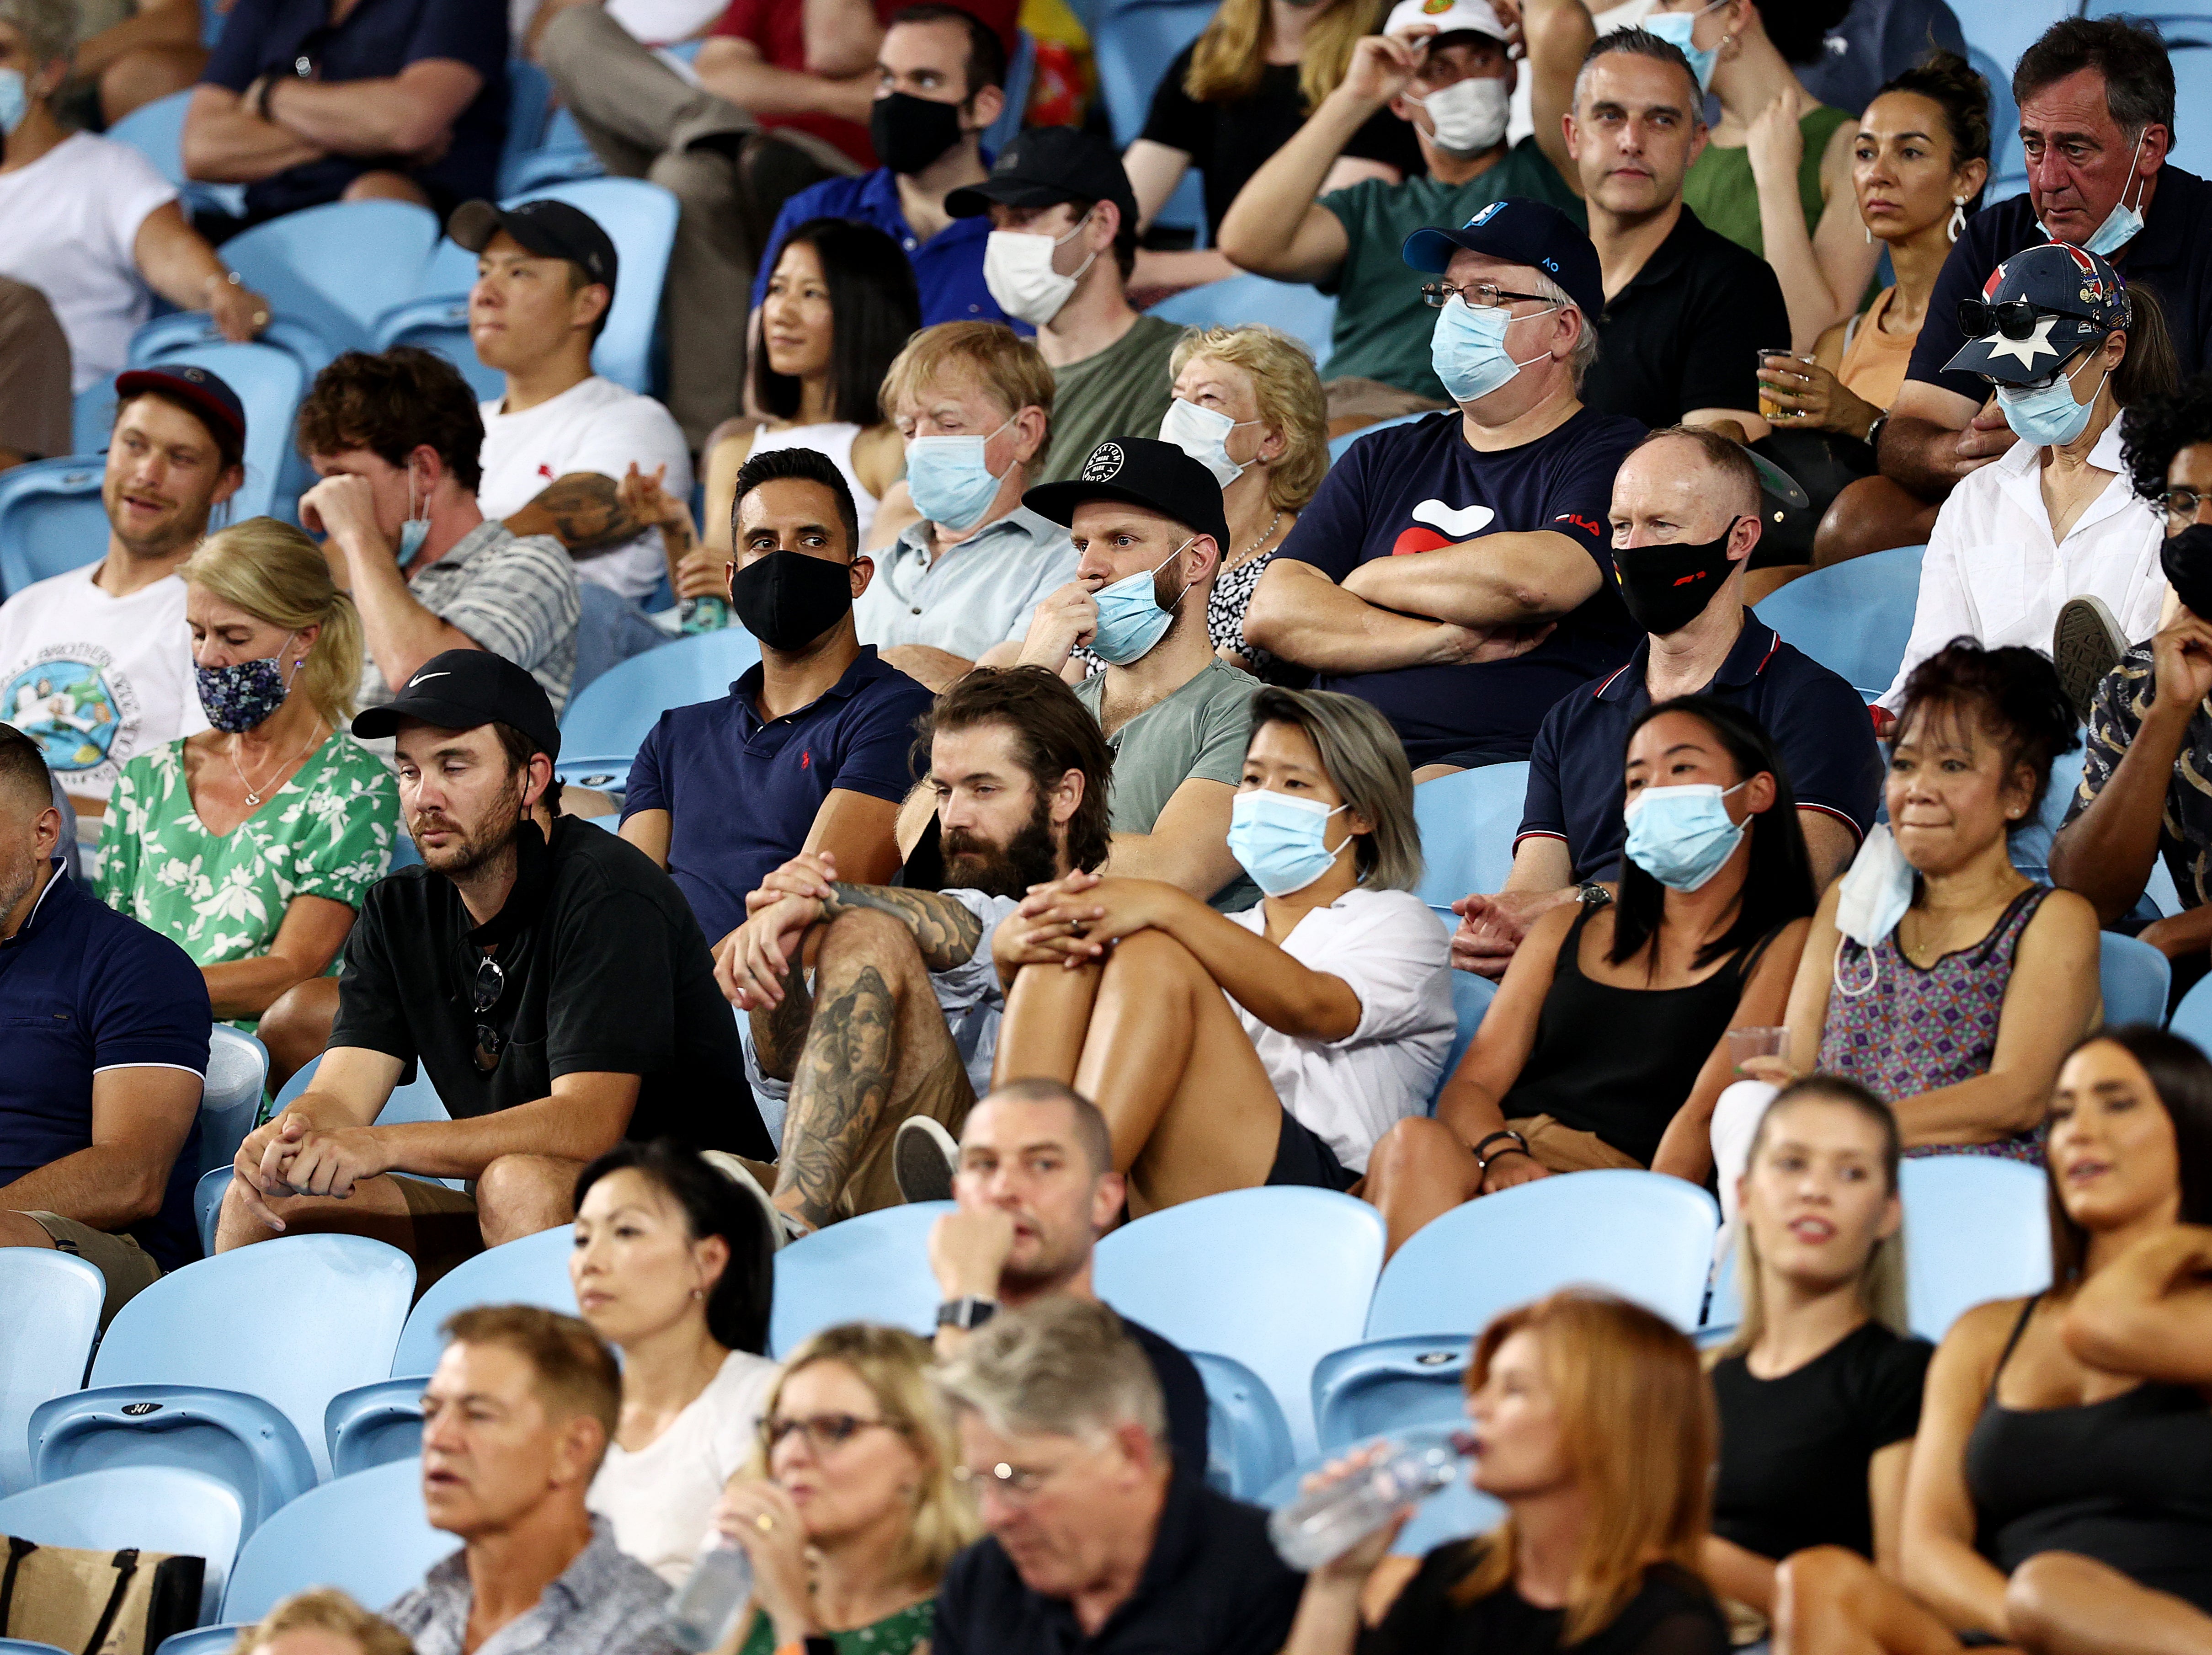 Up to 30,000 fans have been allowed at the Australian Open each day so far